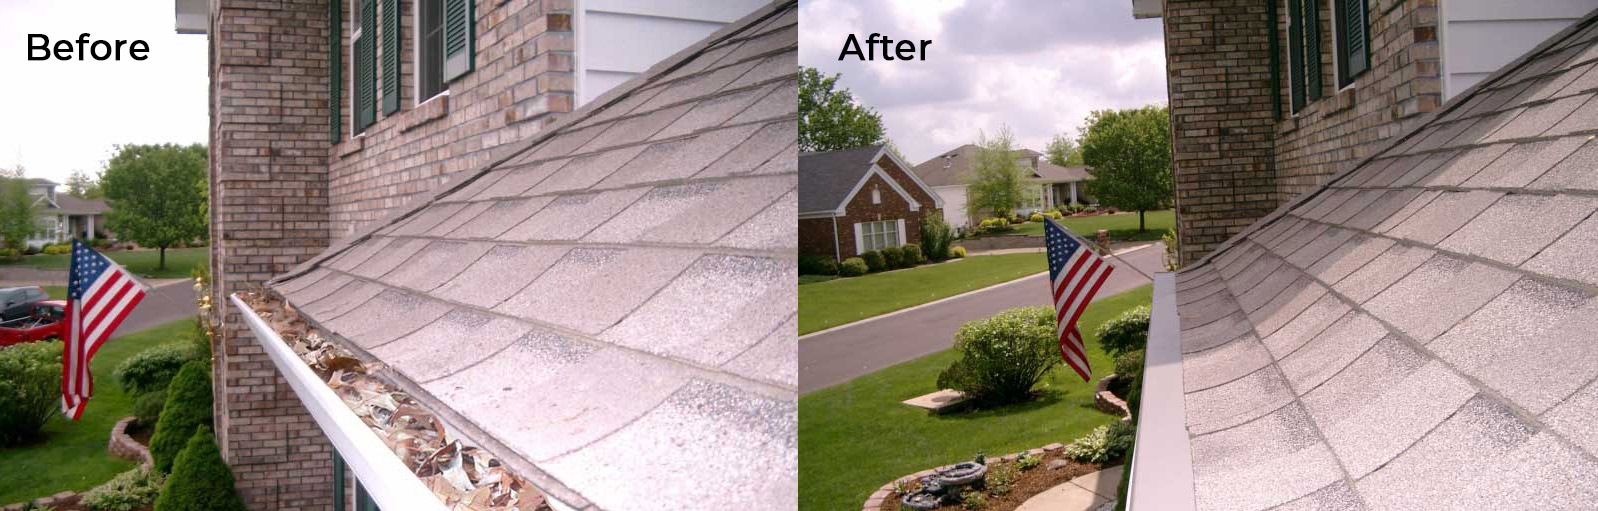 Top Quality Gutter Protection in Saint Charles, MO by The Gutter Cover Company